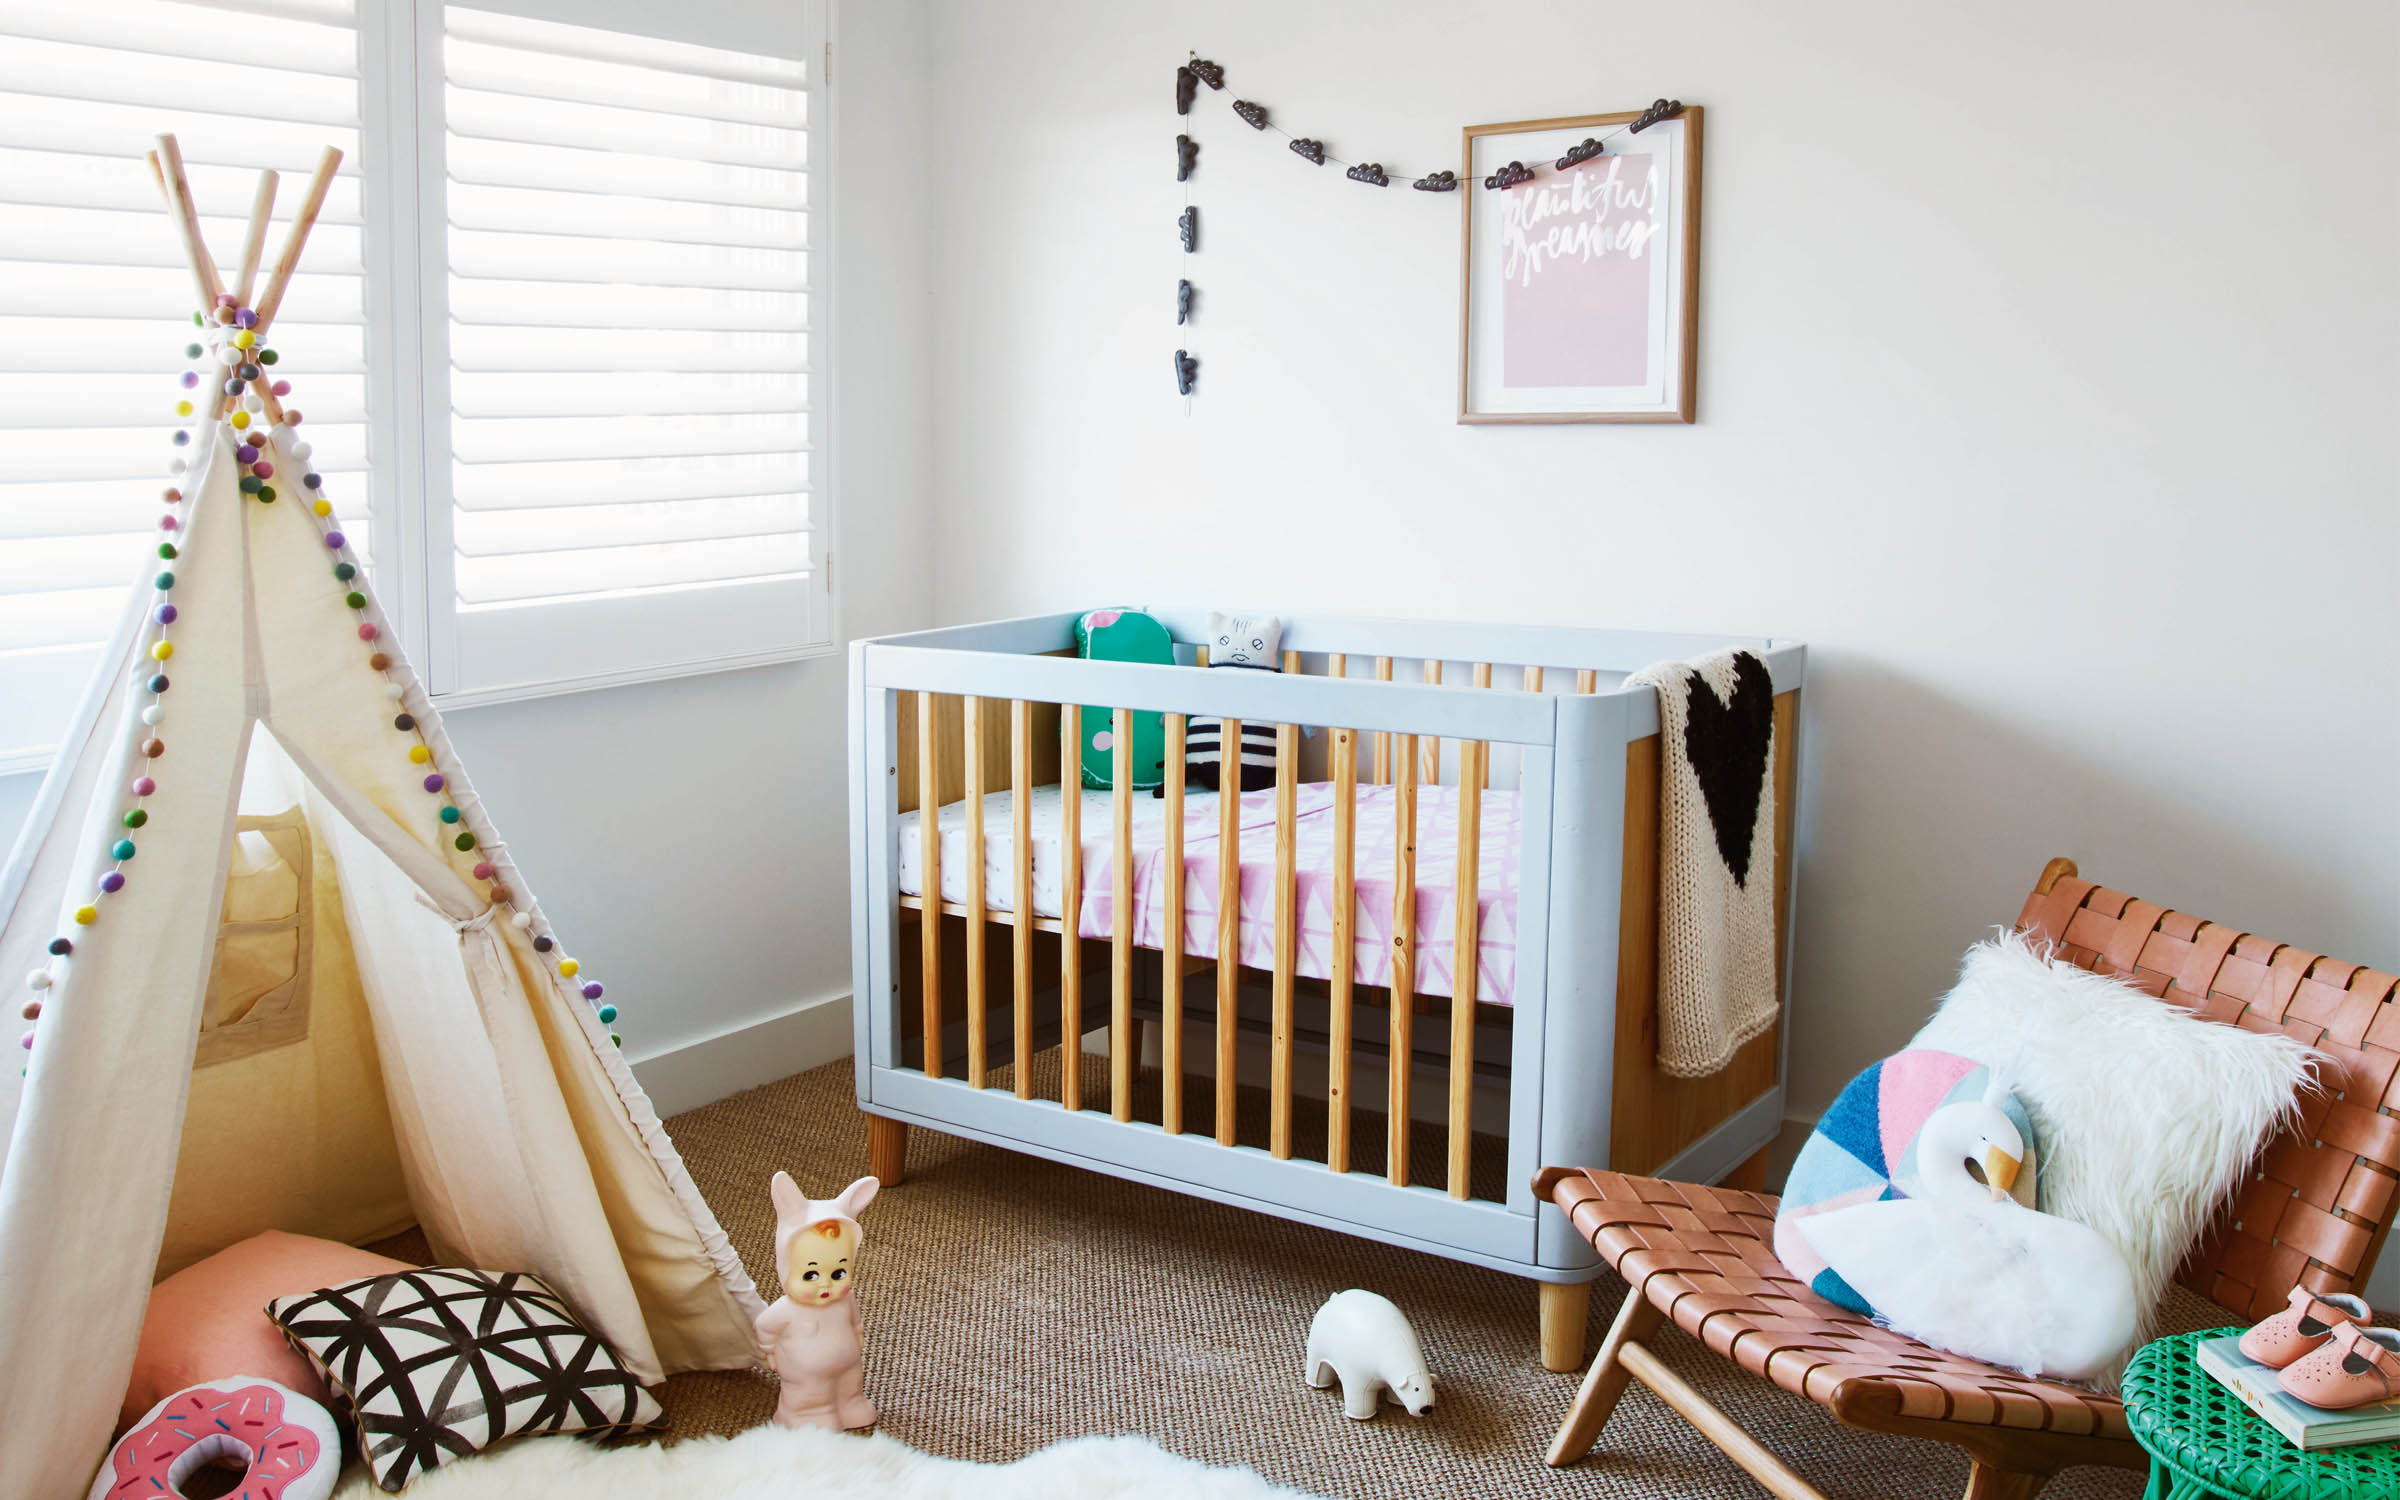 Children's room with baby cot, teepee, and mid century chair.